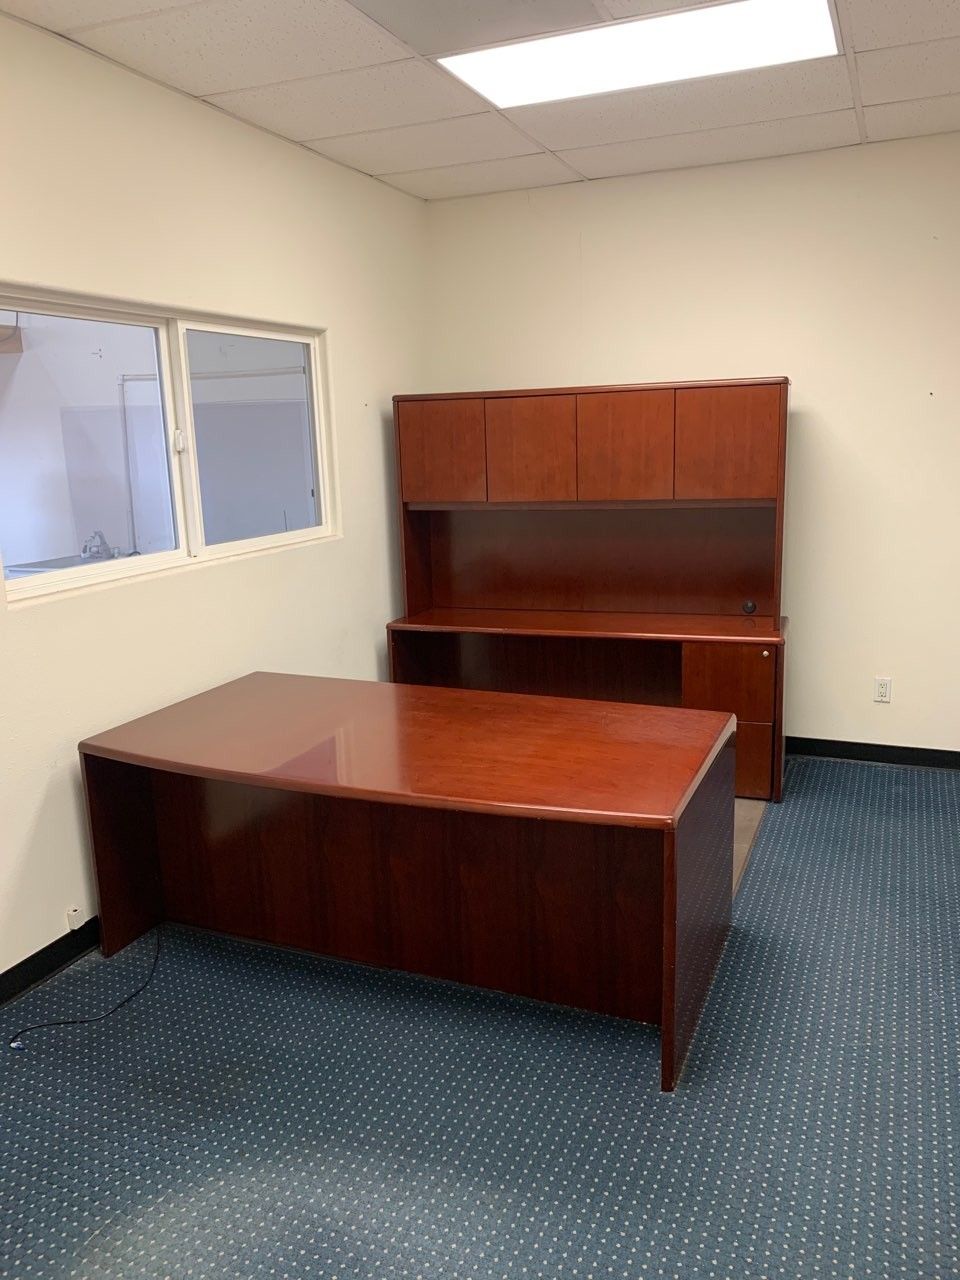 Used desks and office chairs